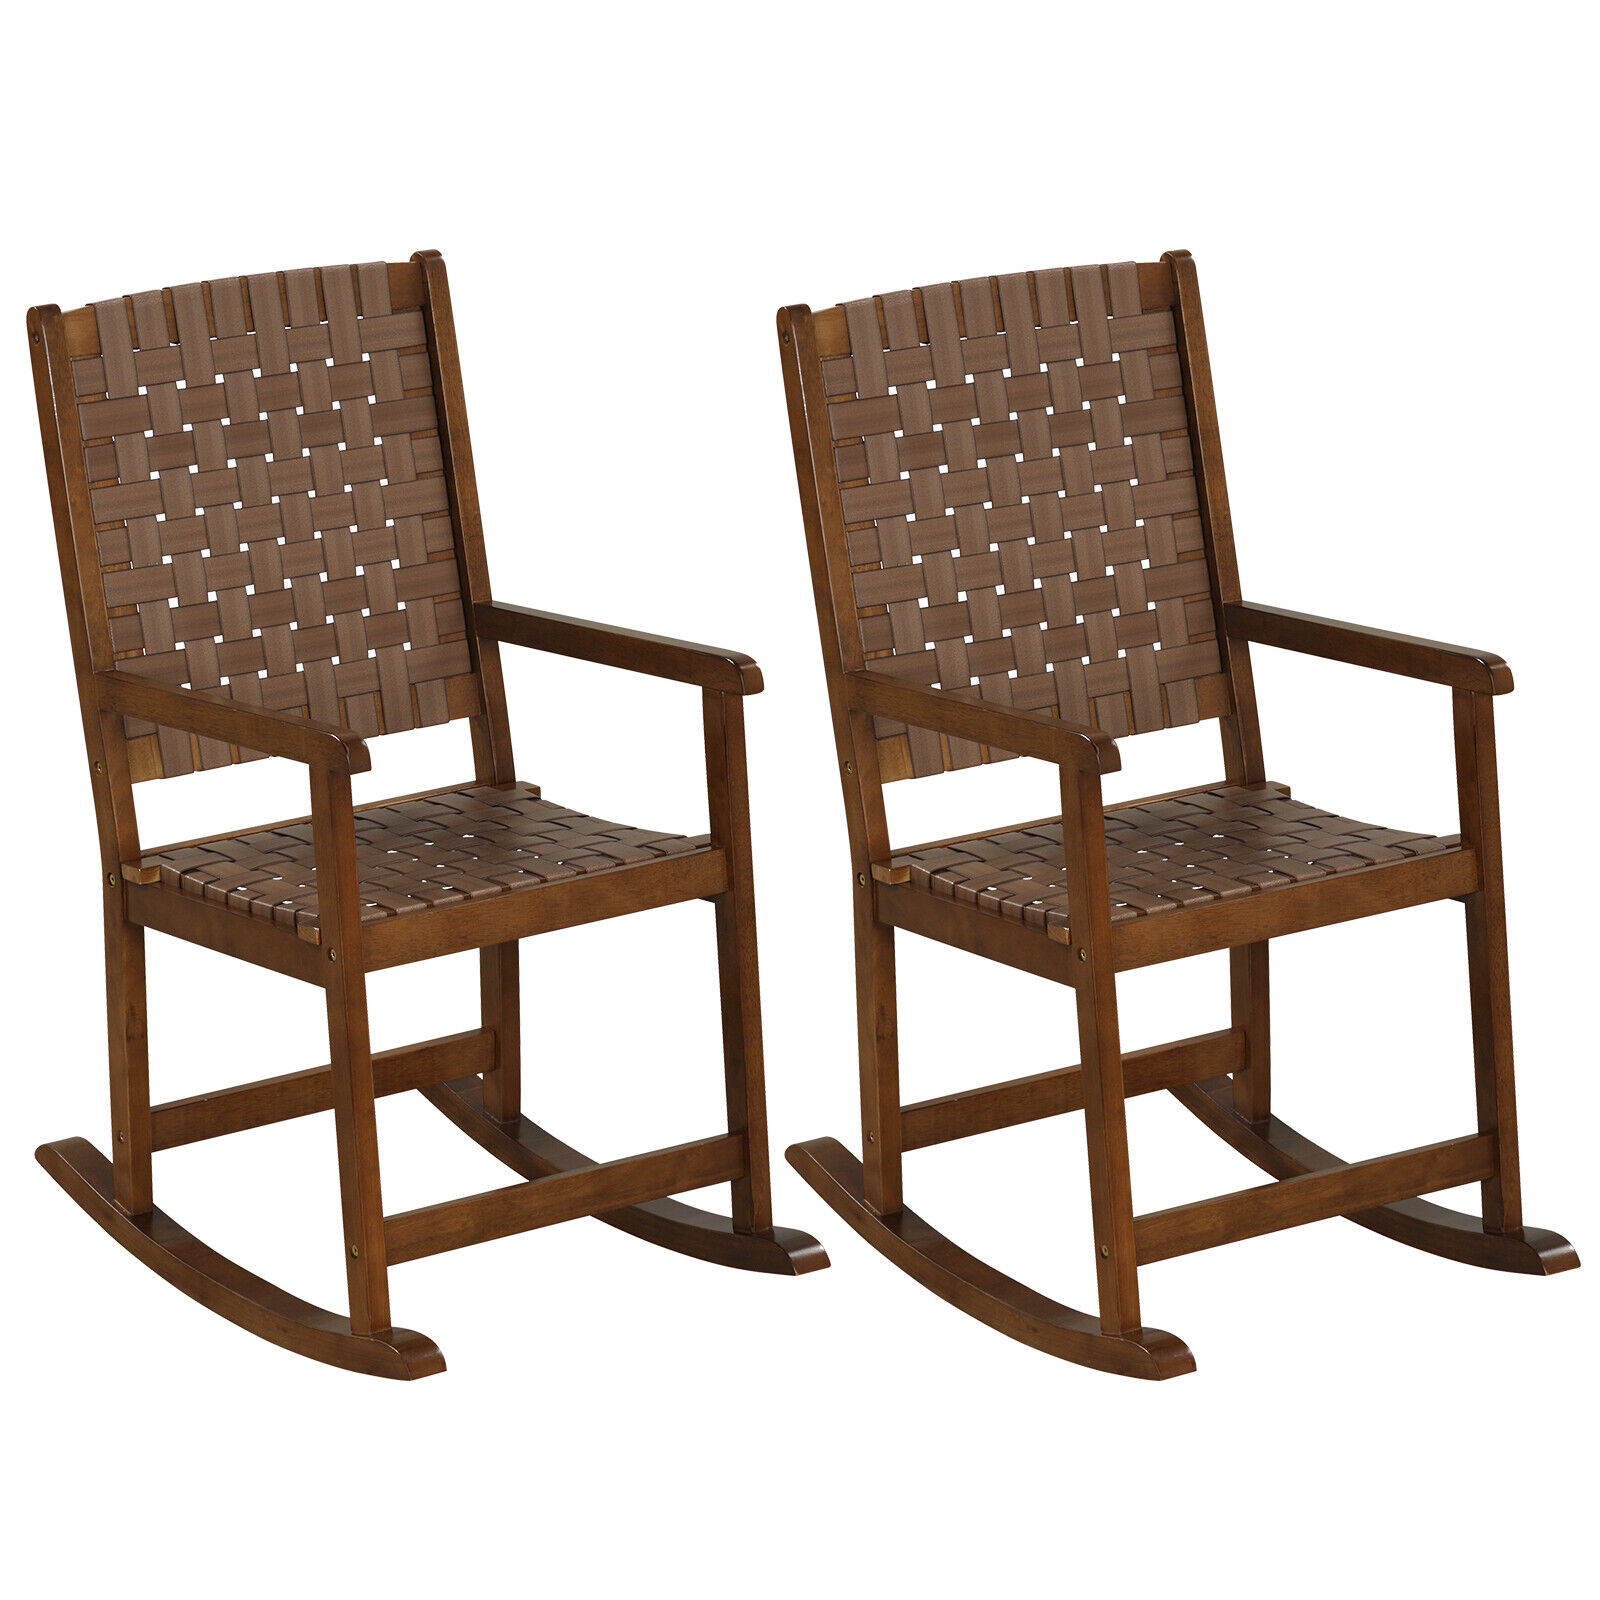 Great Choice Products 2Pcs Wood Rocking Chair Indoor Outdoor Rocking Chair W/Pu Seat&Rubber Wood Frame